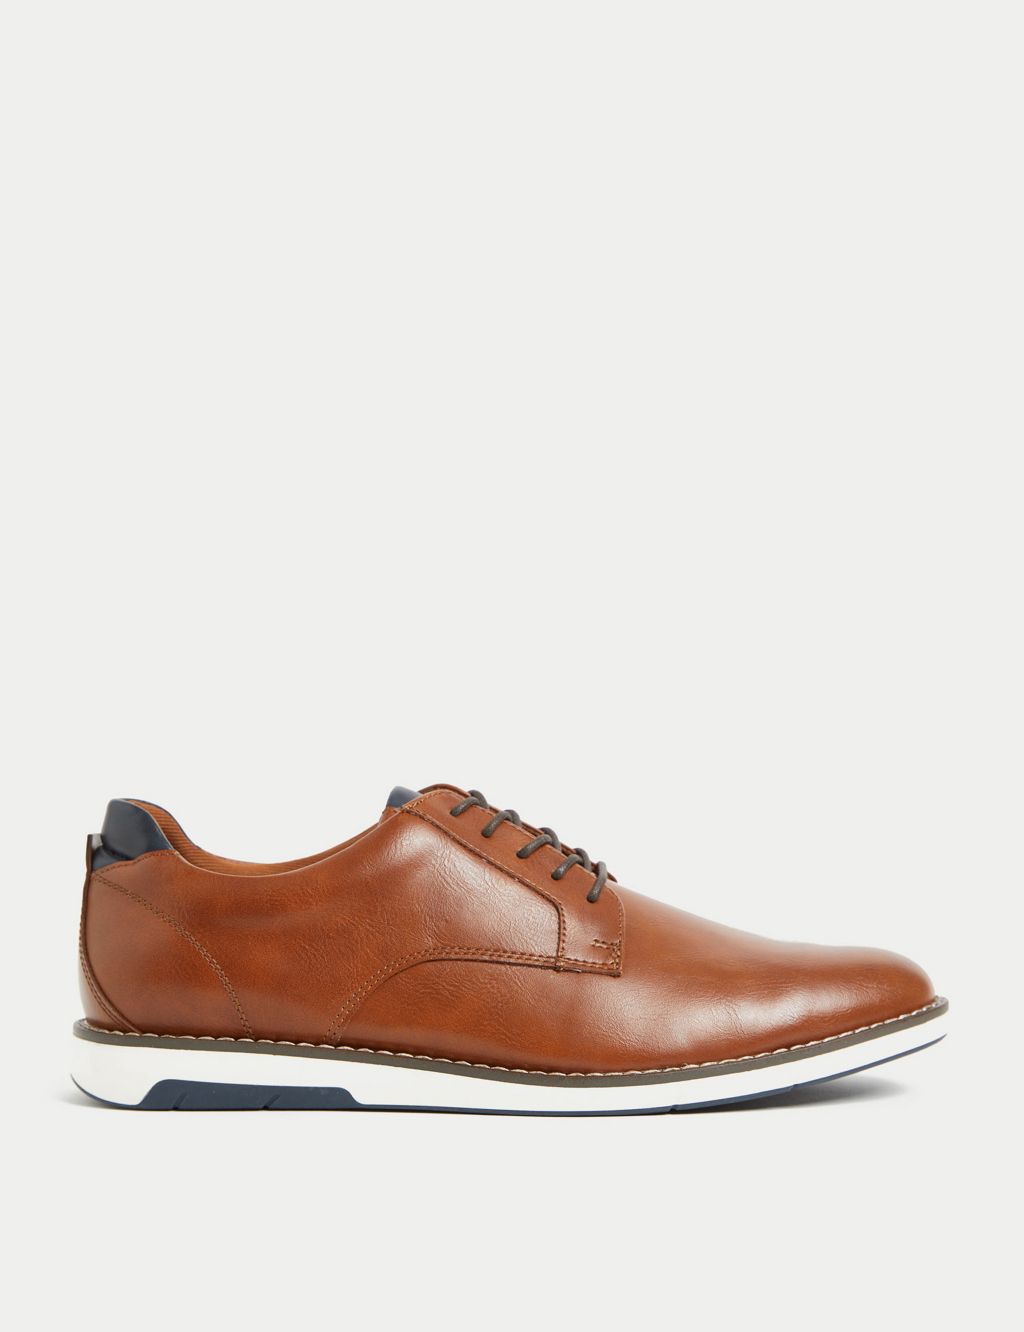 Derby Shoes image 1